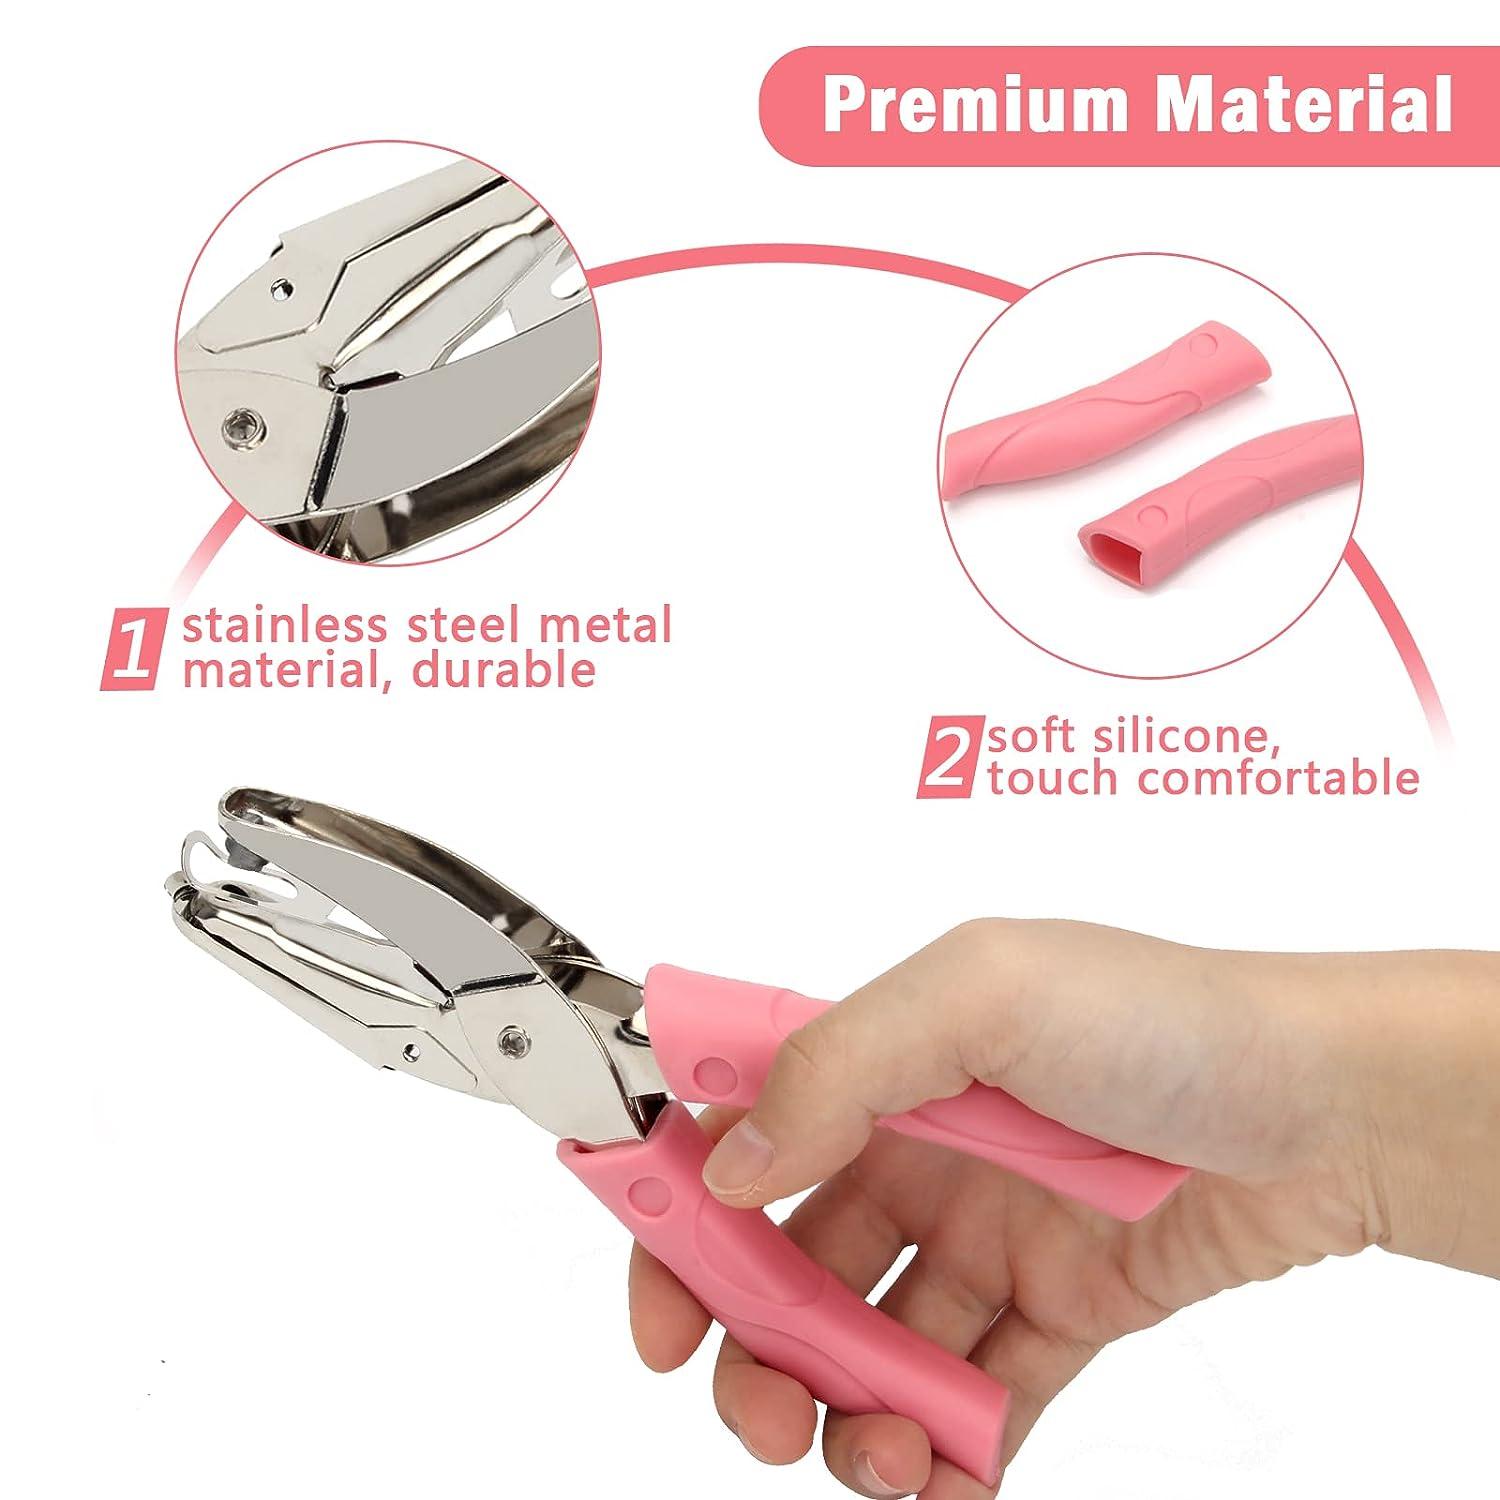 Handheld Hole Paper Punch Puncher for Craft Paper Tags Clothing Ticket DIY Scrapbook Tool, with Pink Soft Handheld Grip (Heart Shaped 1/4 inch)